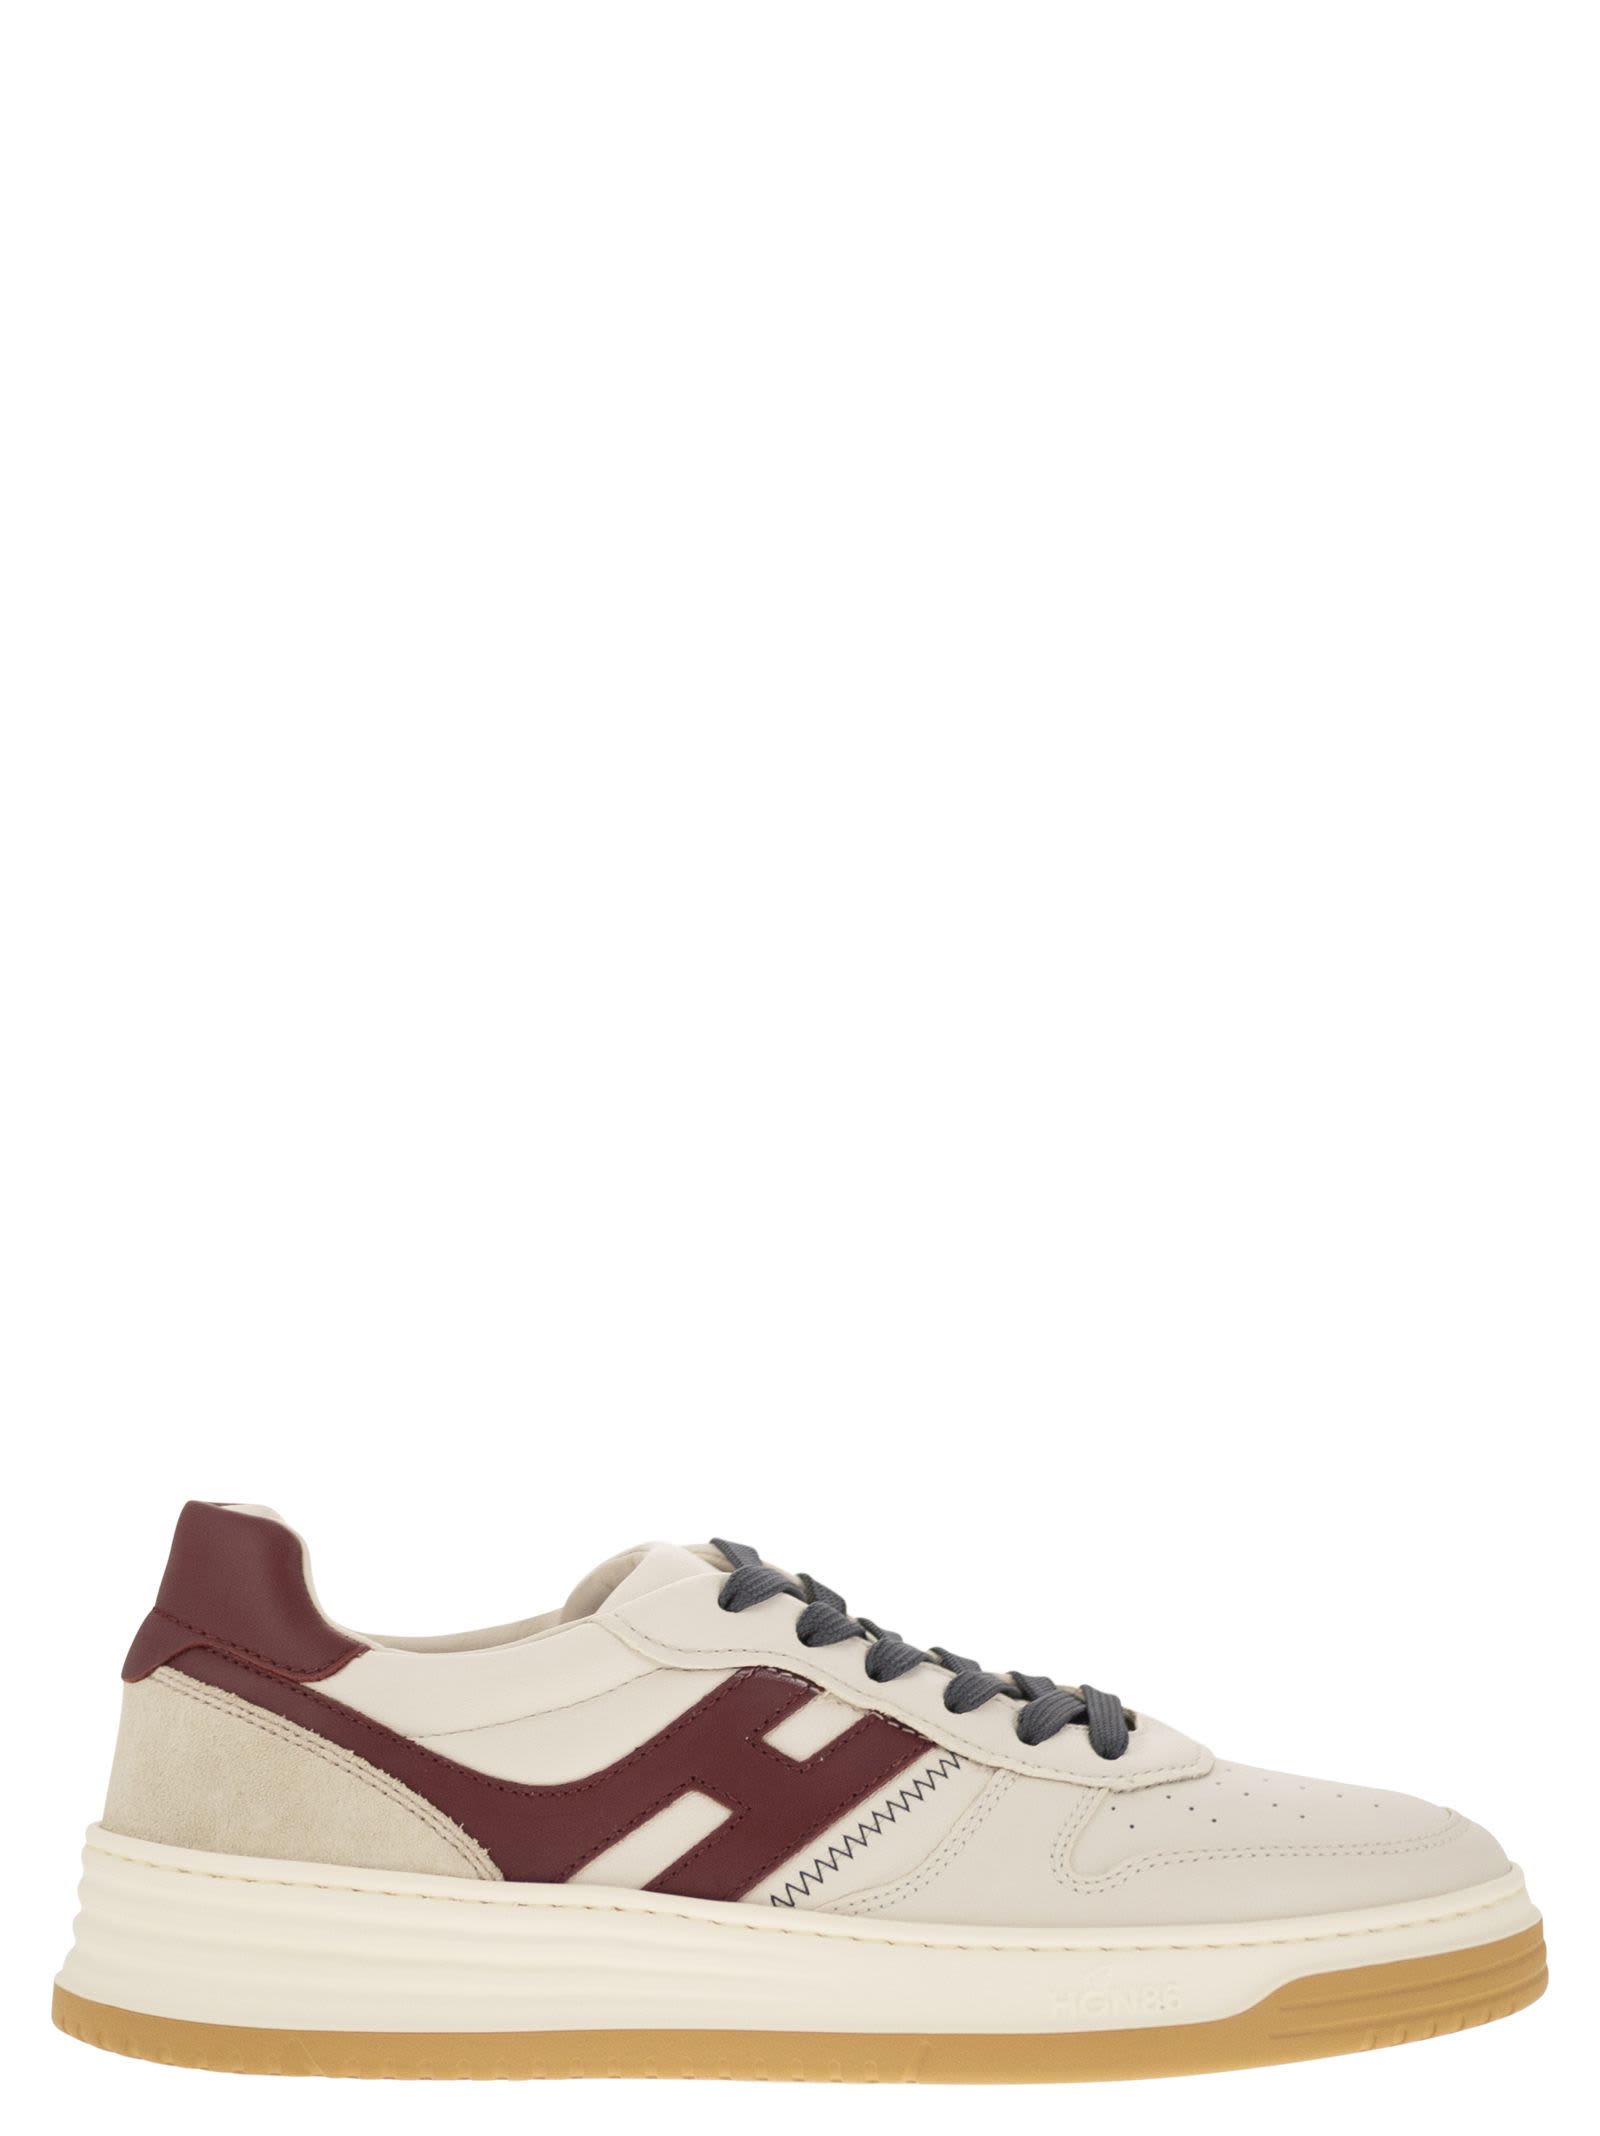 H630 - Leather Lace-up Trainers